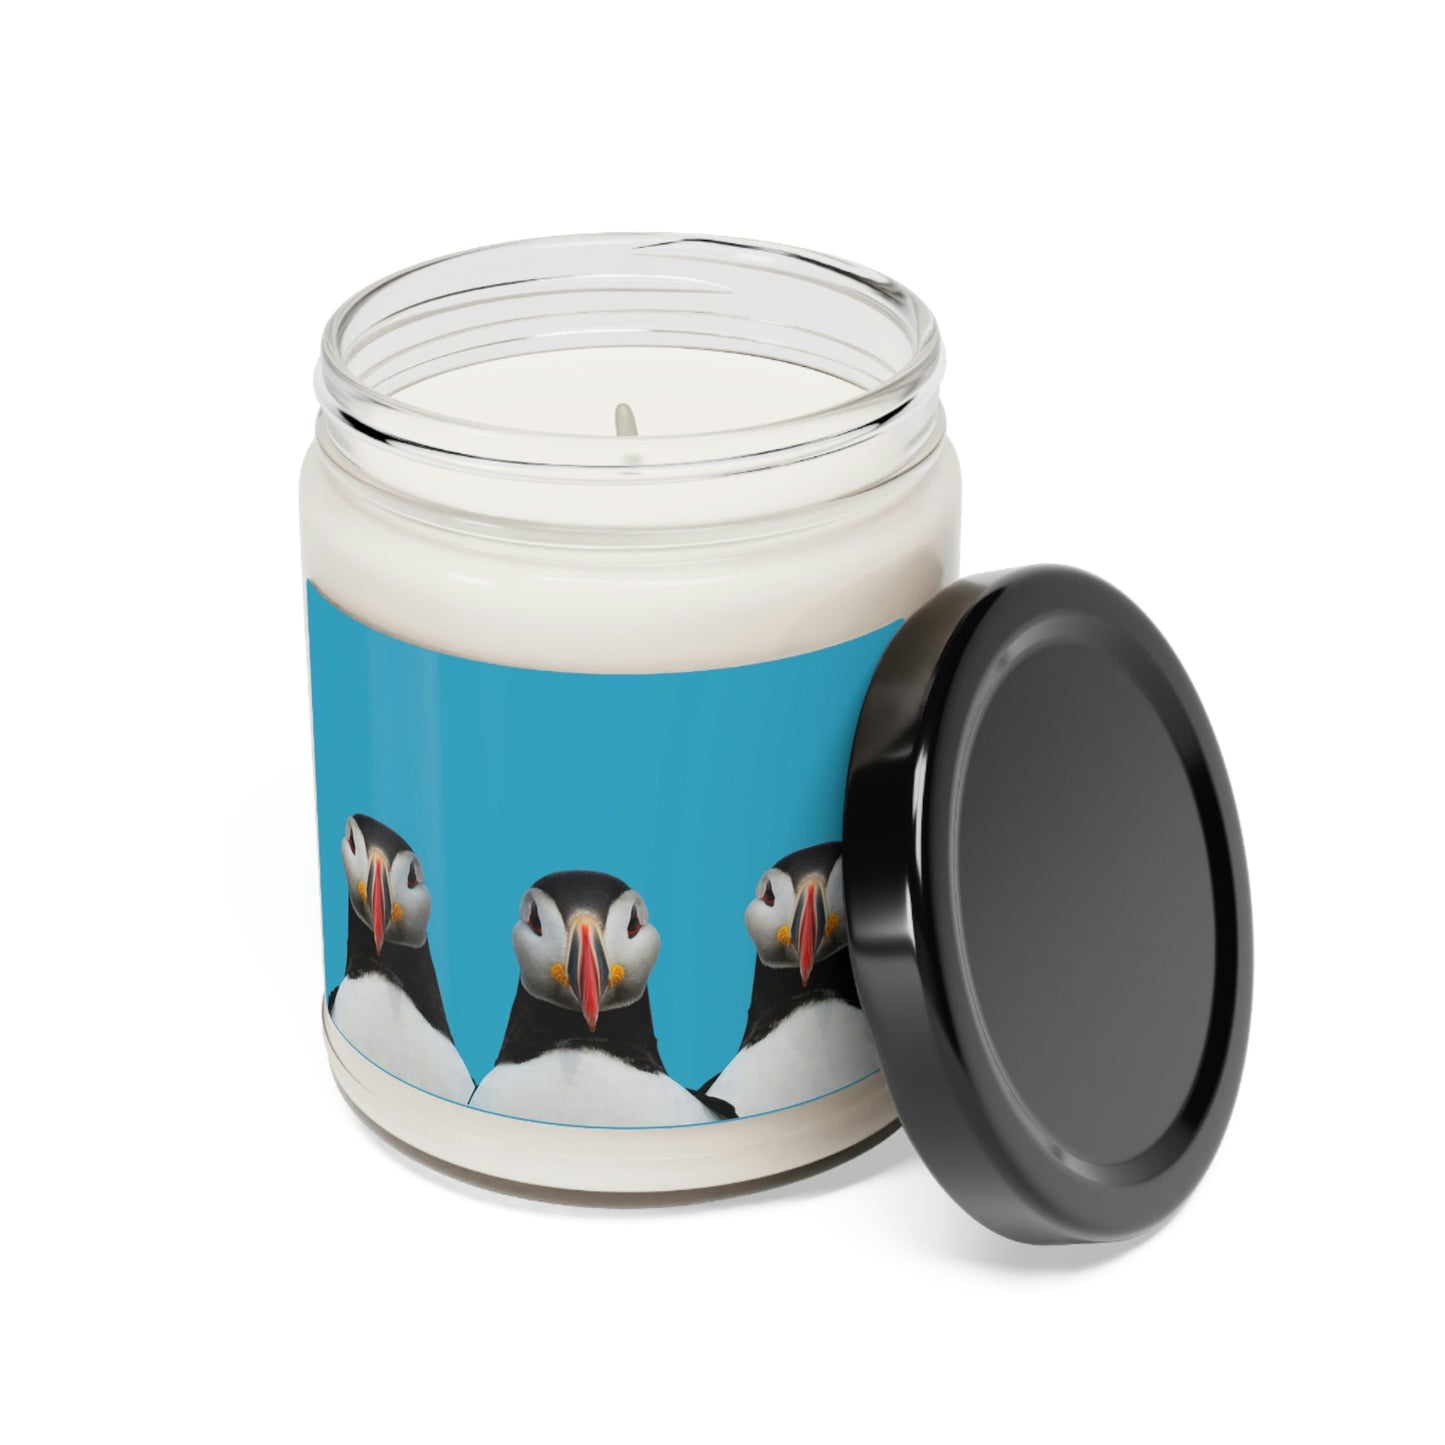 Puffins Scented Soy Candle - 9oz